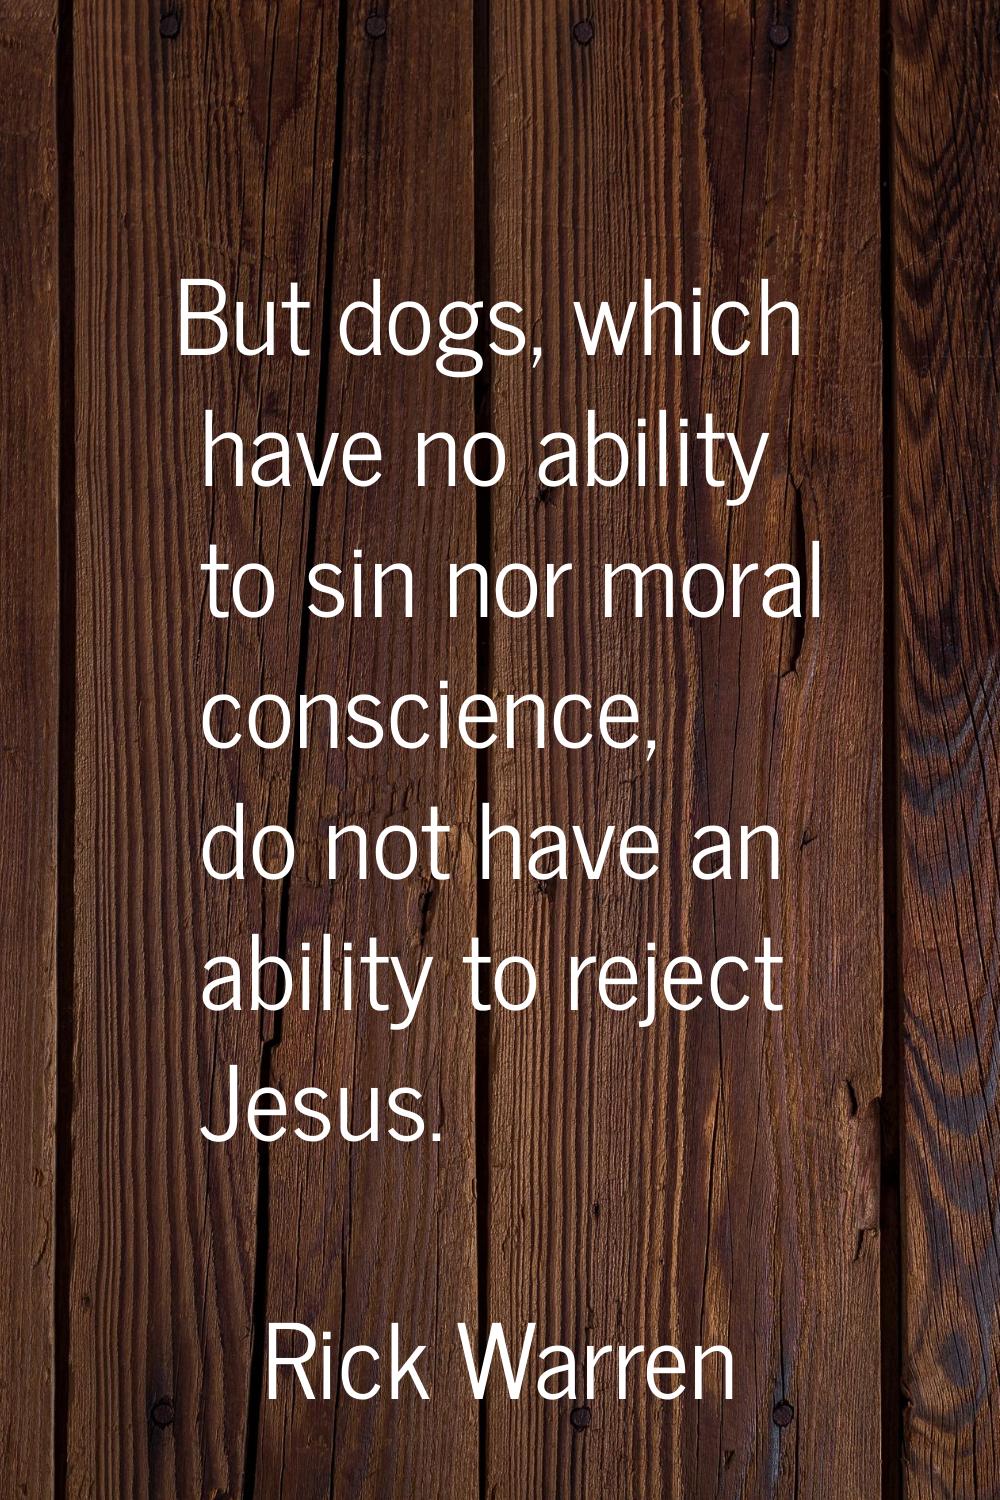 But dogs, which have no ability to sin nor moral conscience, do not have an ability to reject Jesus